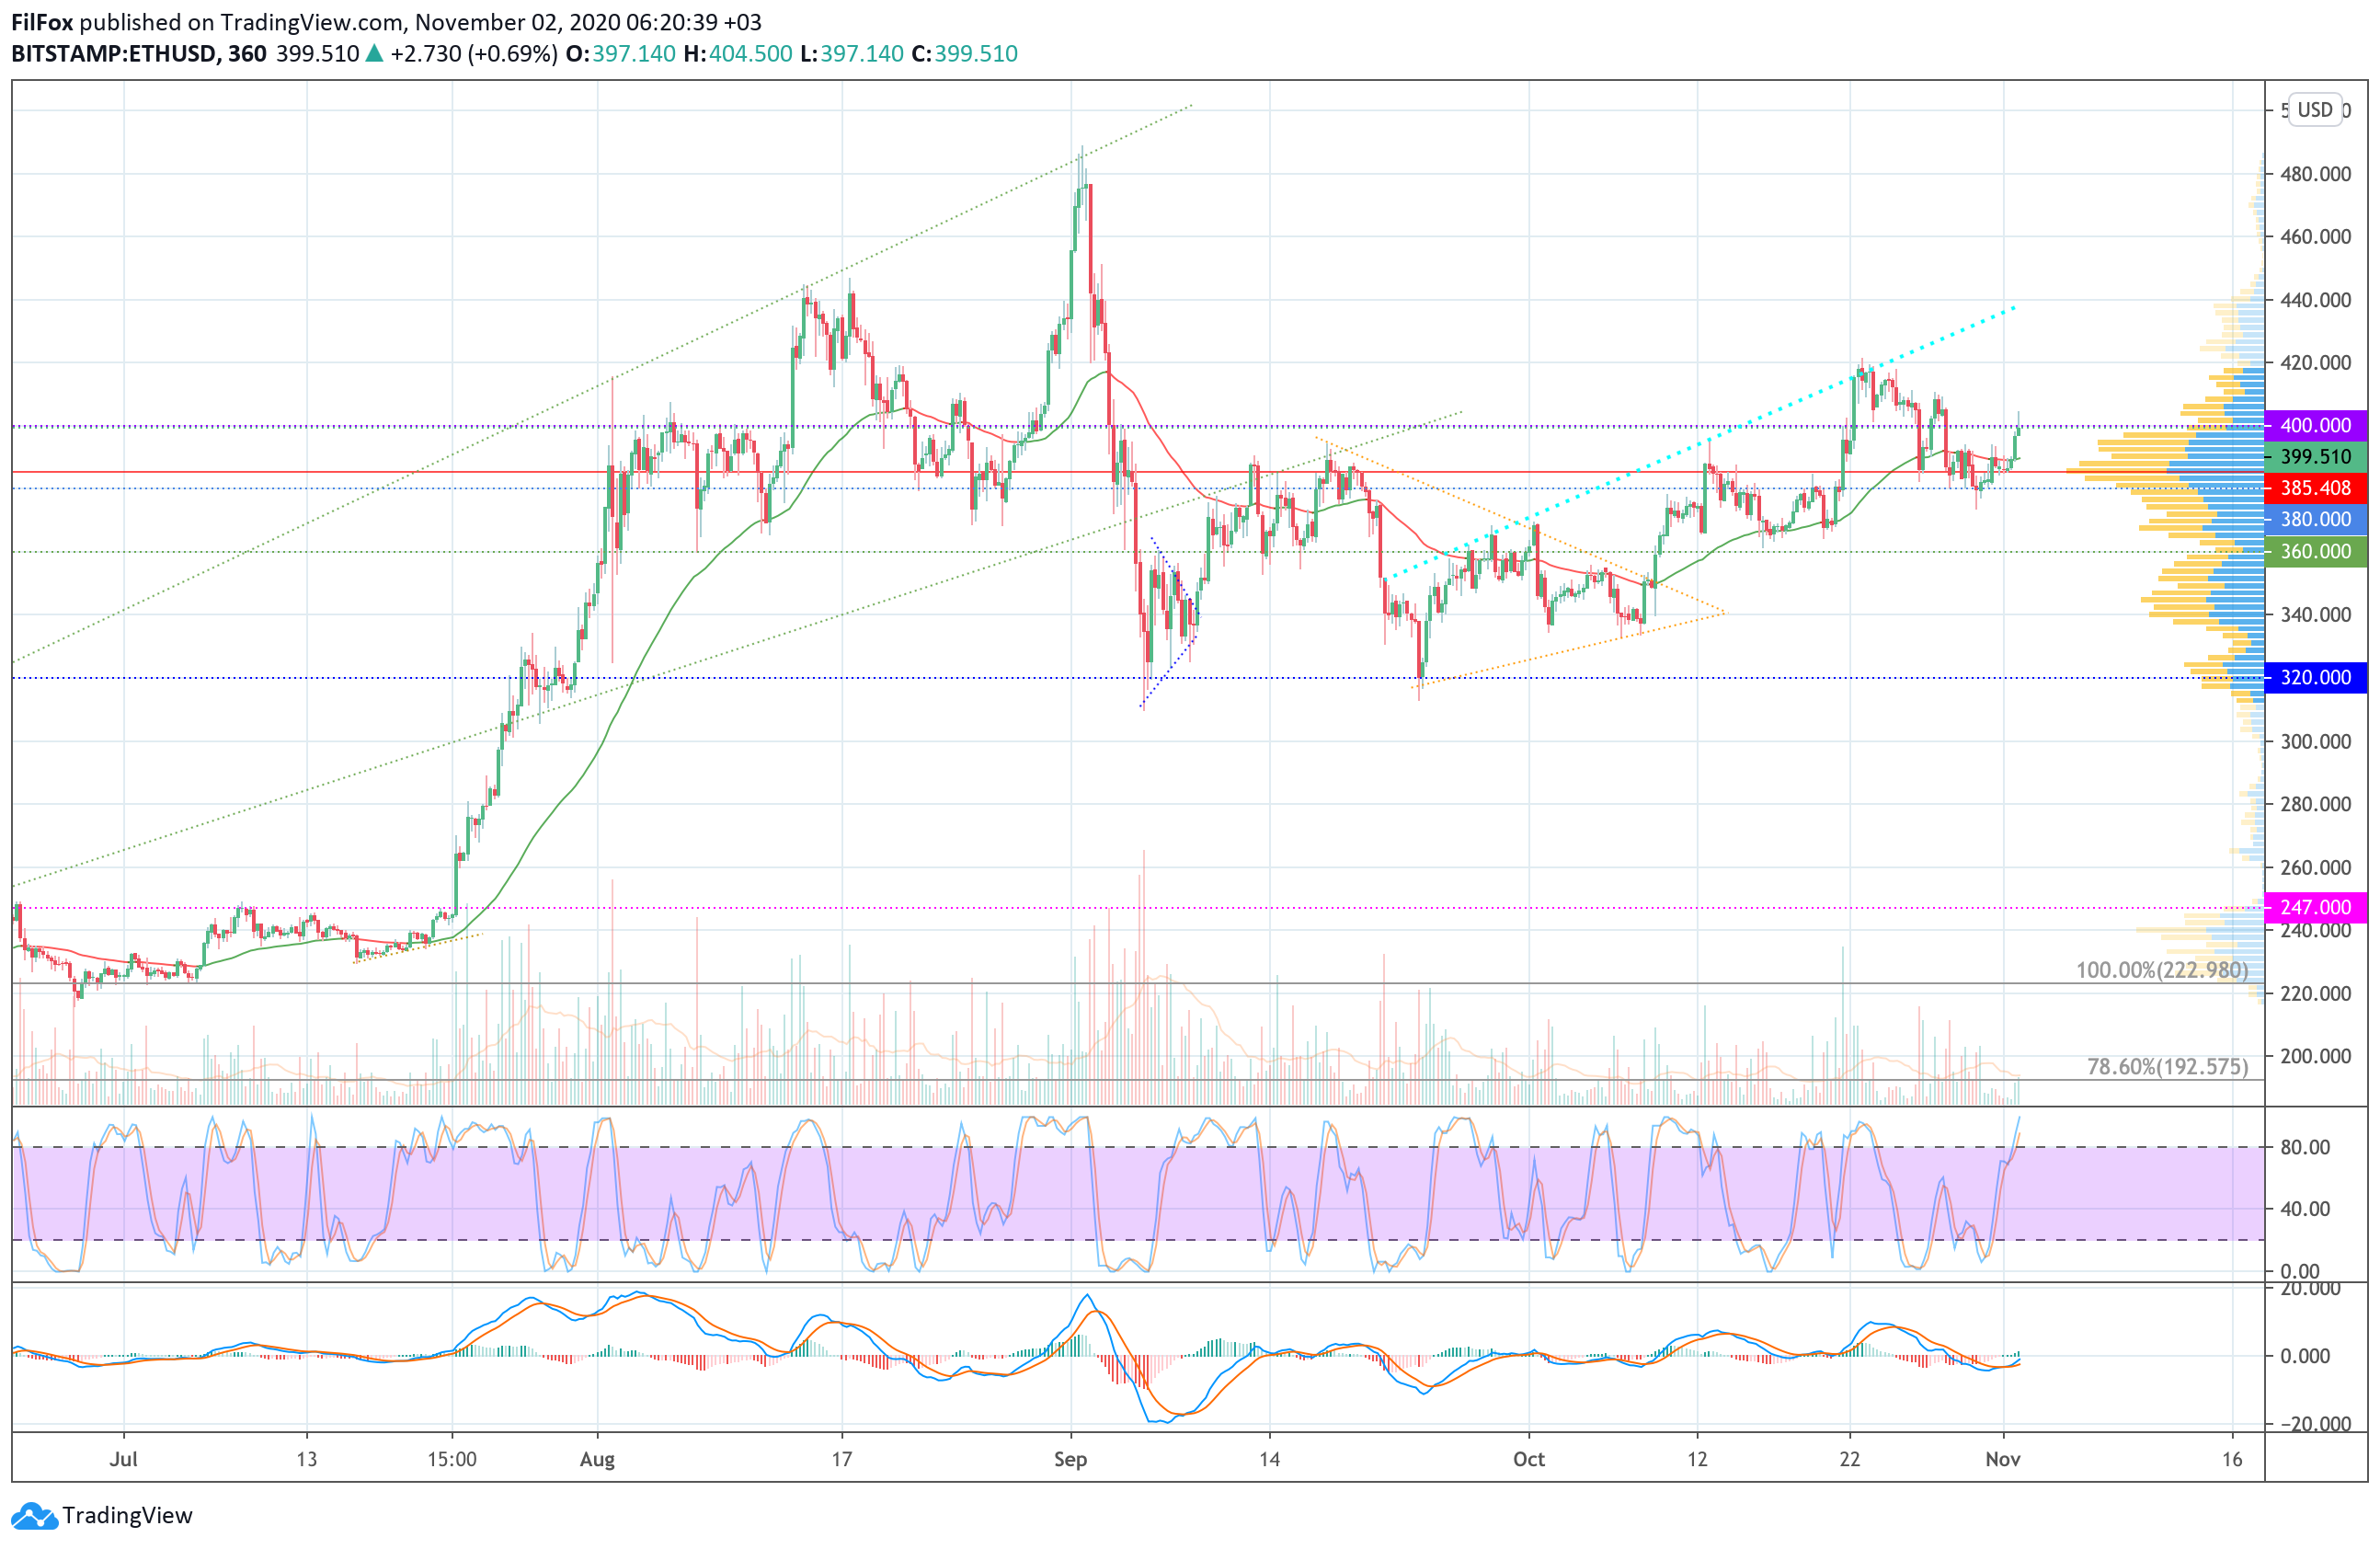 Analysis of prices for Bitcoin, Ethereum, Ripple for 11/02/2020